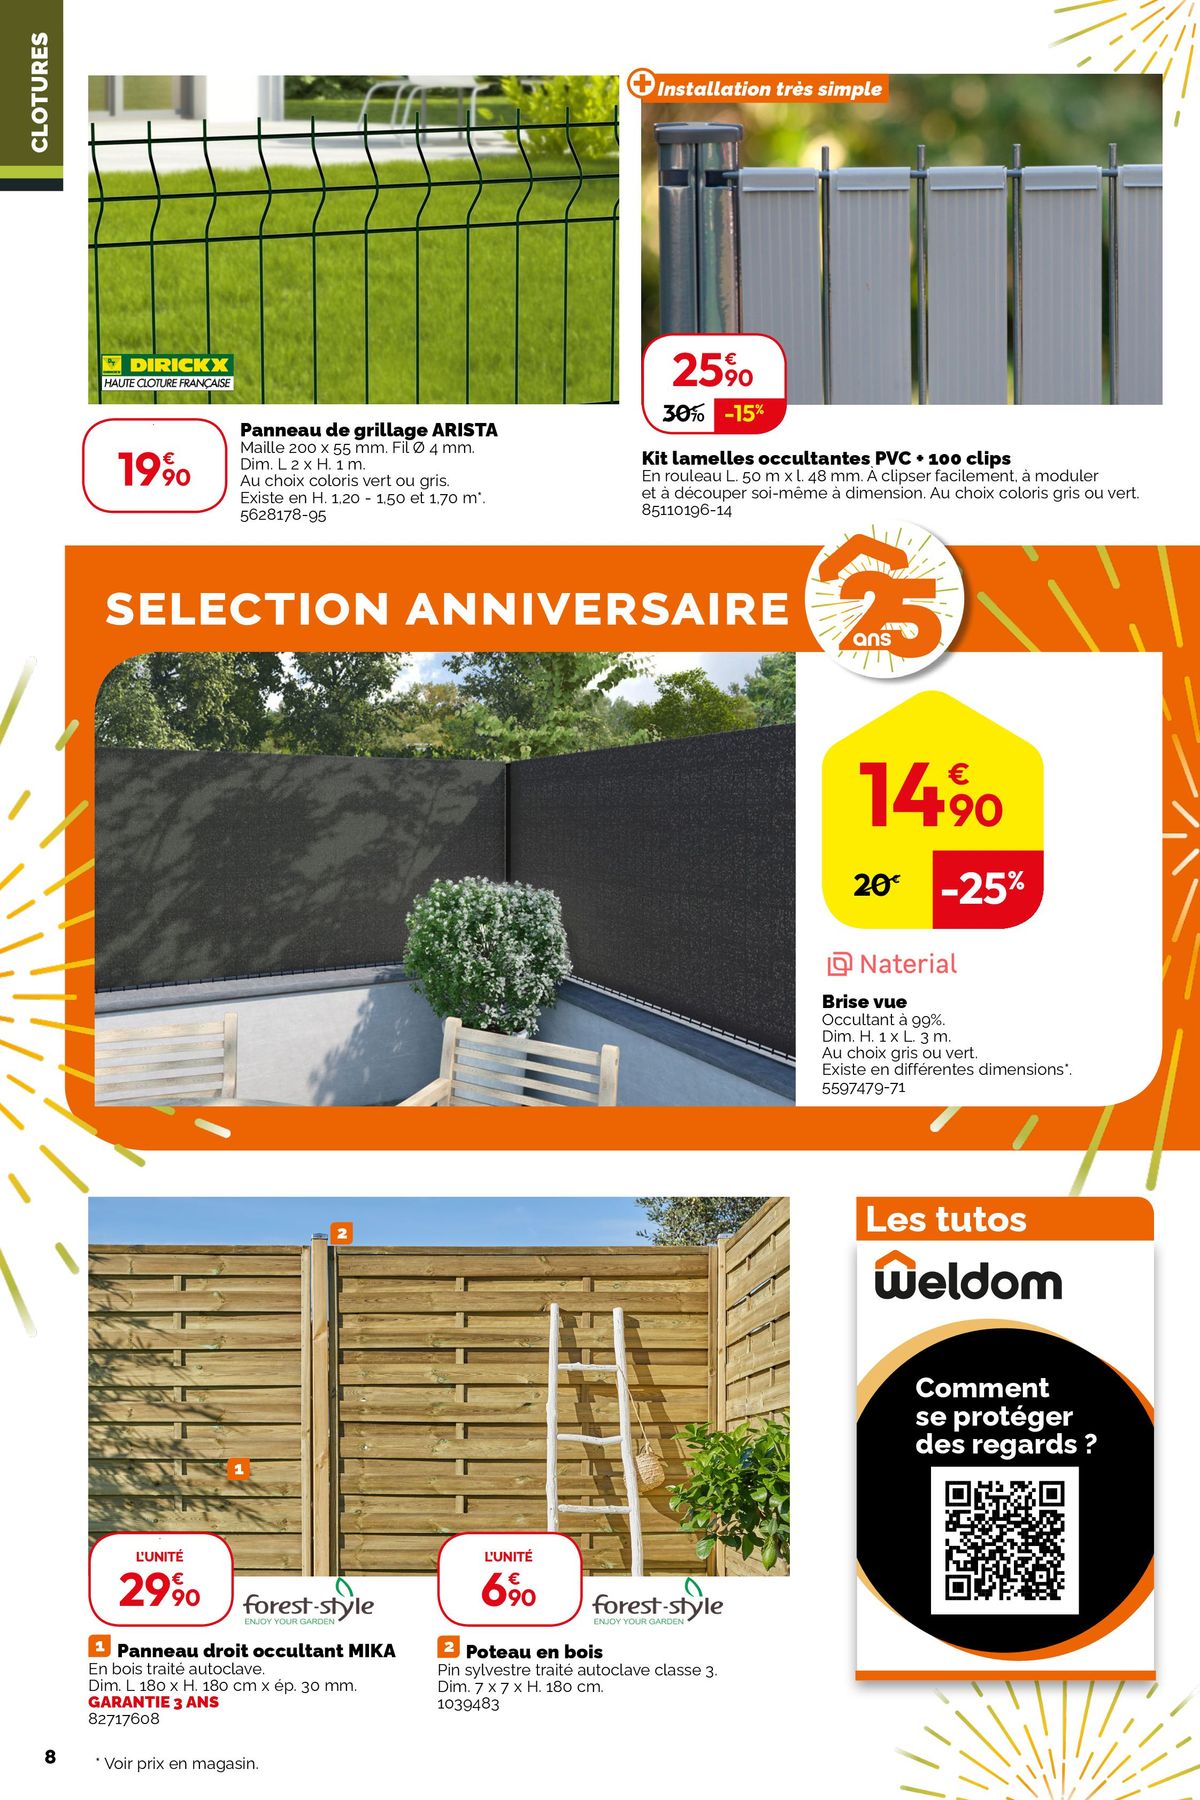 Catalogue 25 ans Weldom !, page 00008